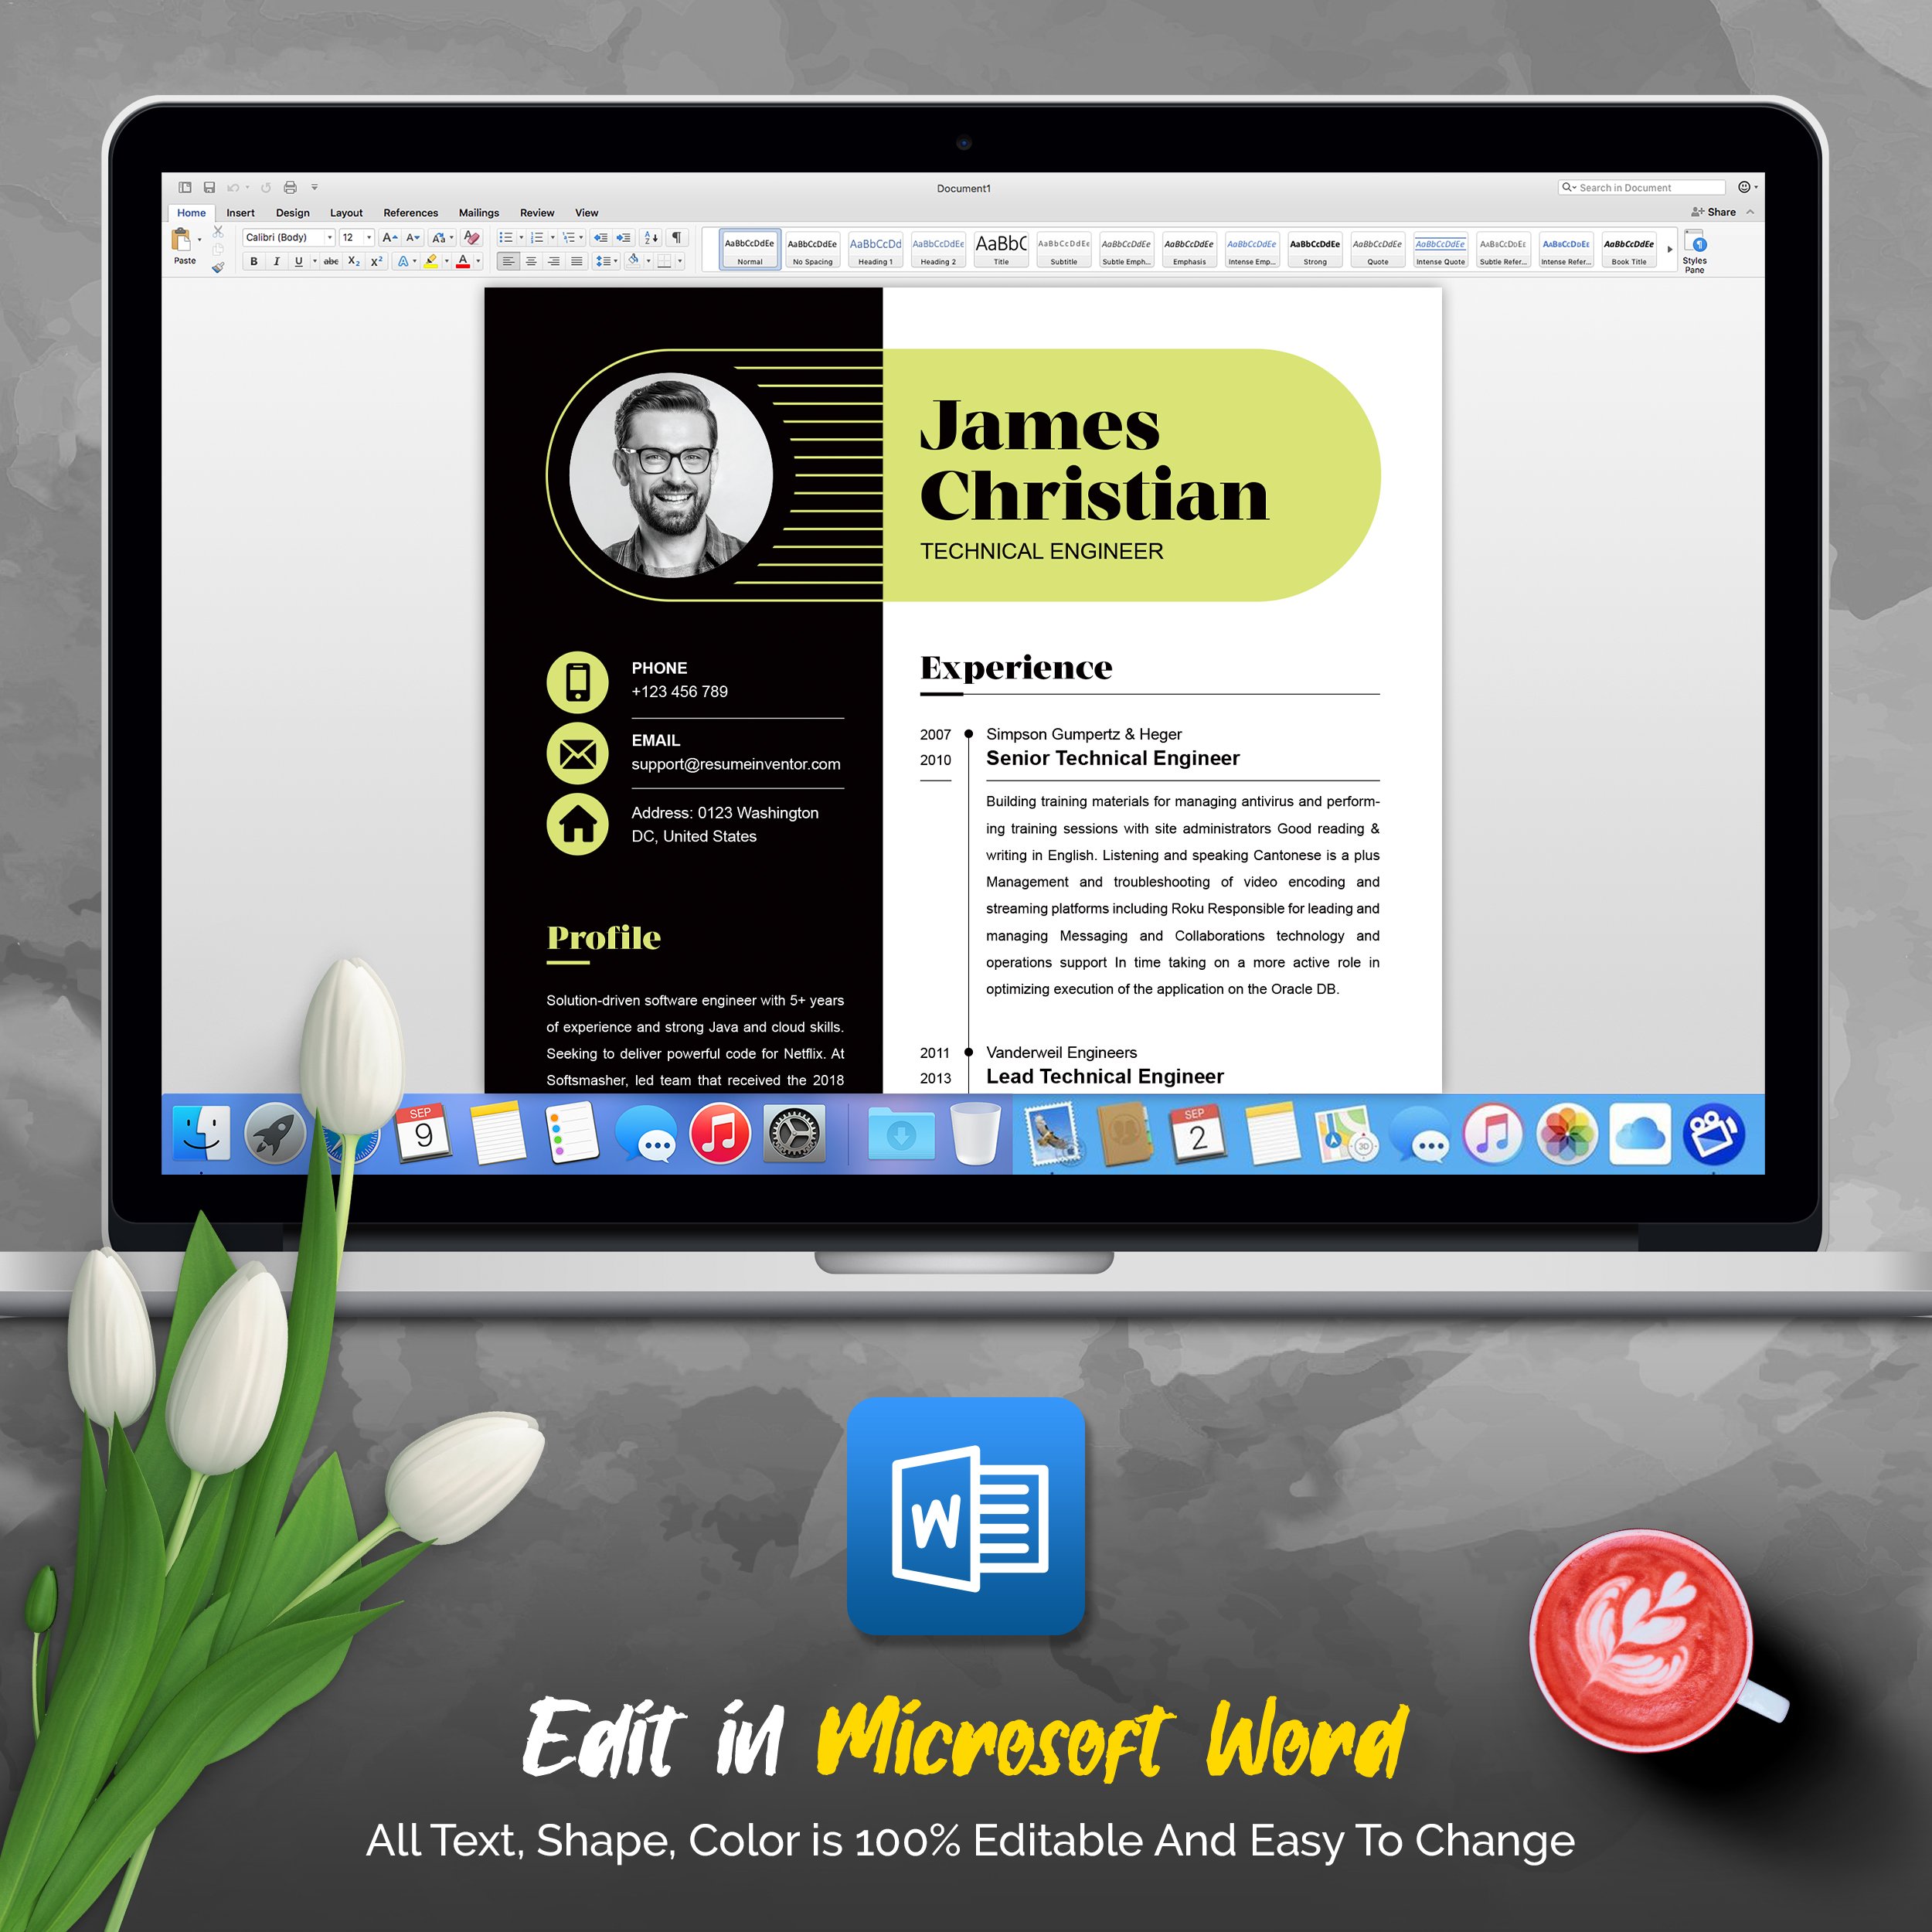 04 4 pages professional ms word aple pages eps photoshop psd resume cv design template design by resume inventor 939